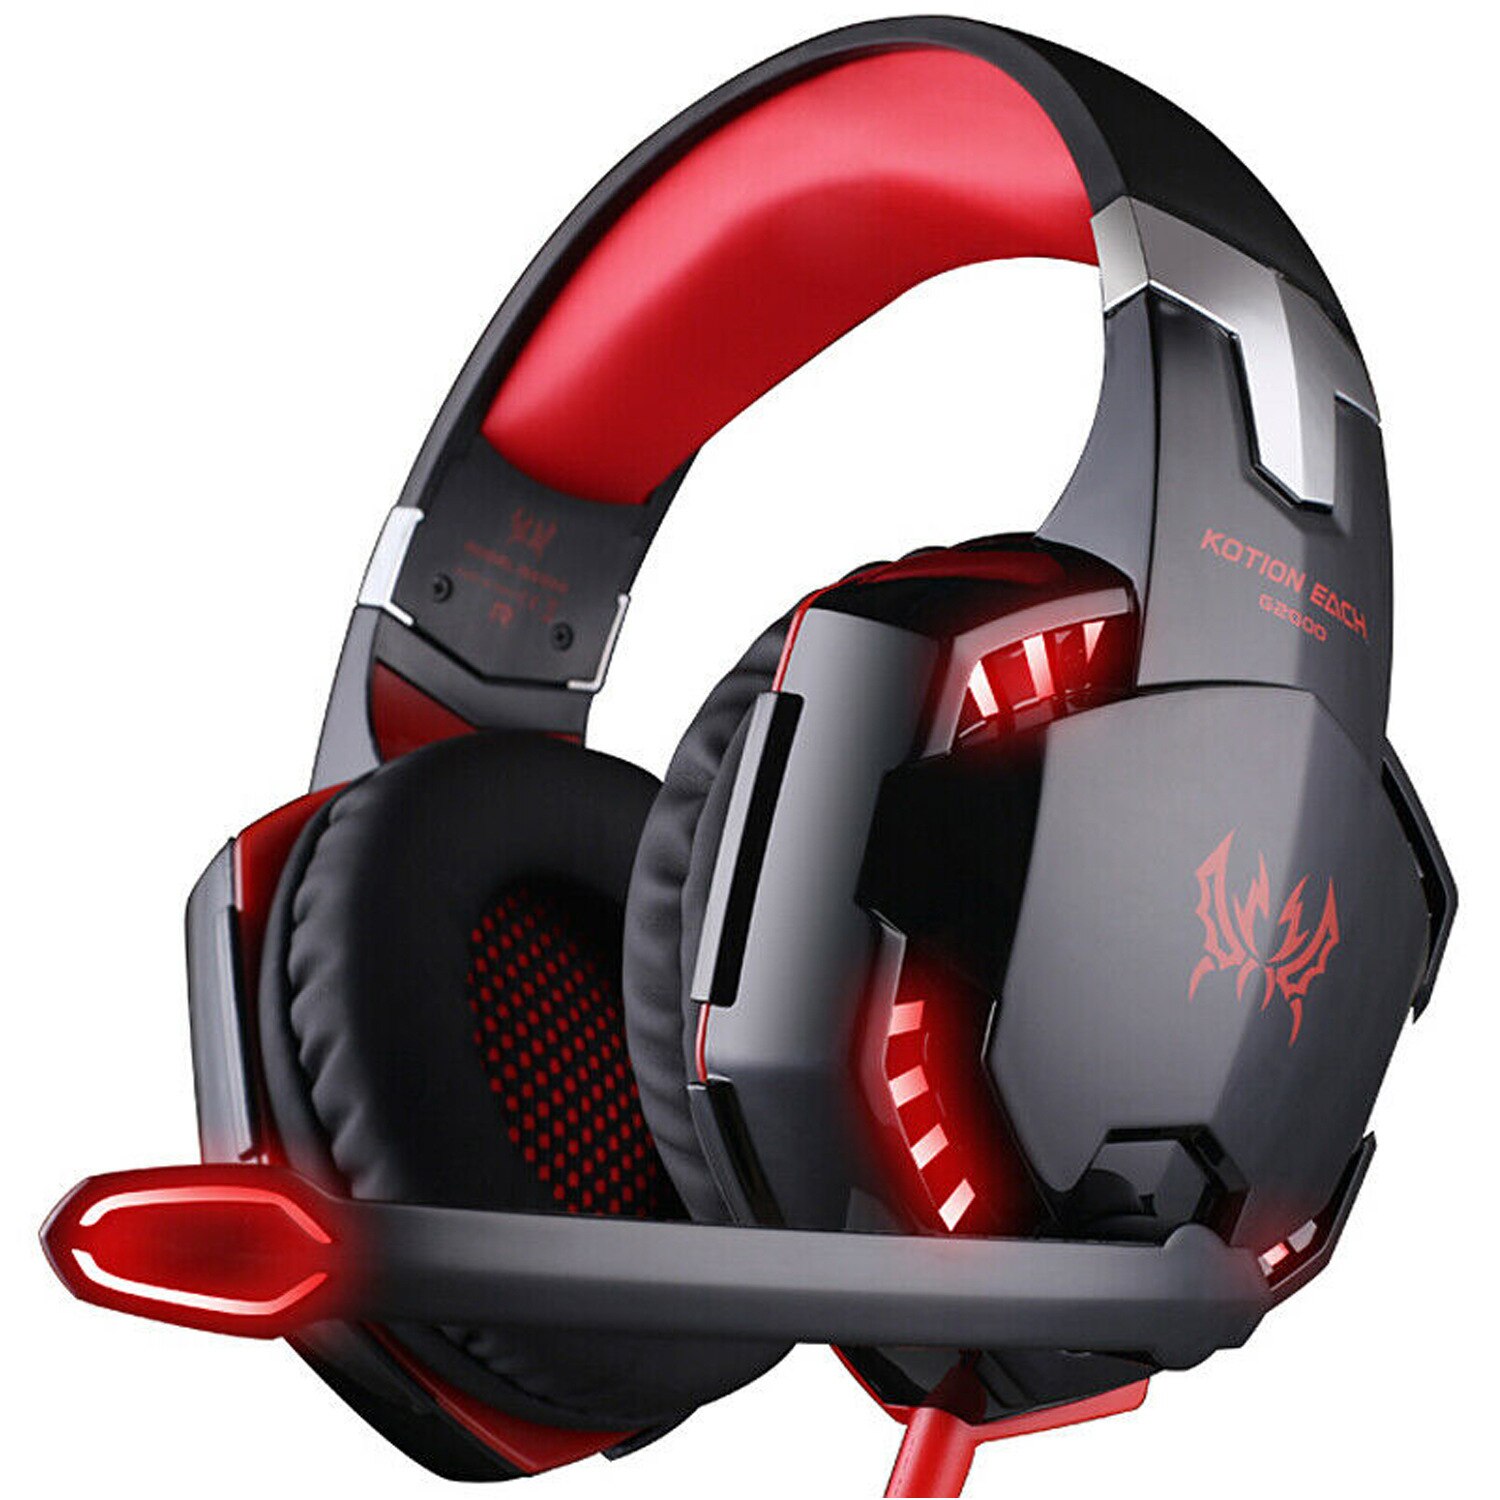 Led Light-Emitting Bedrade Computer Game Headset PS4, Concurrentie Headset, MP3 Headset, Sport Headset, monitoring Headset